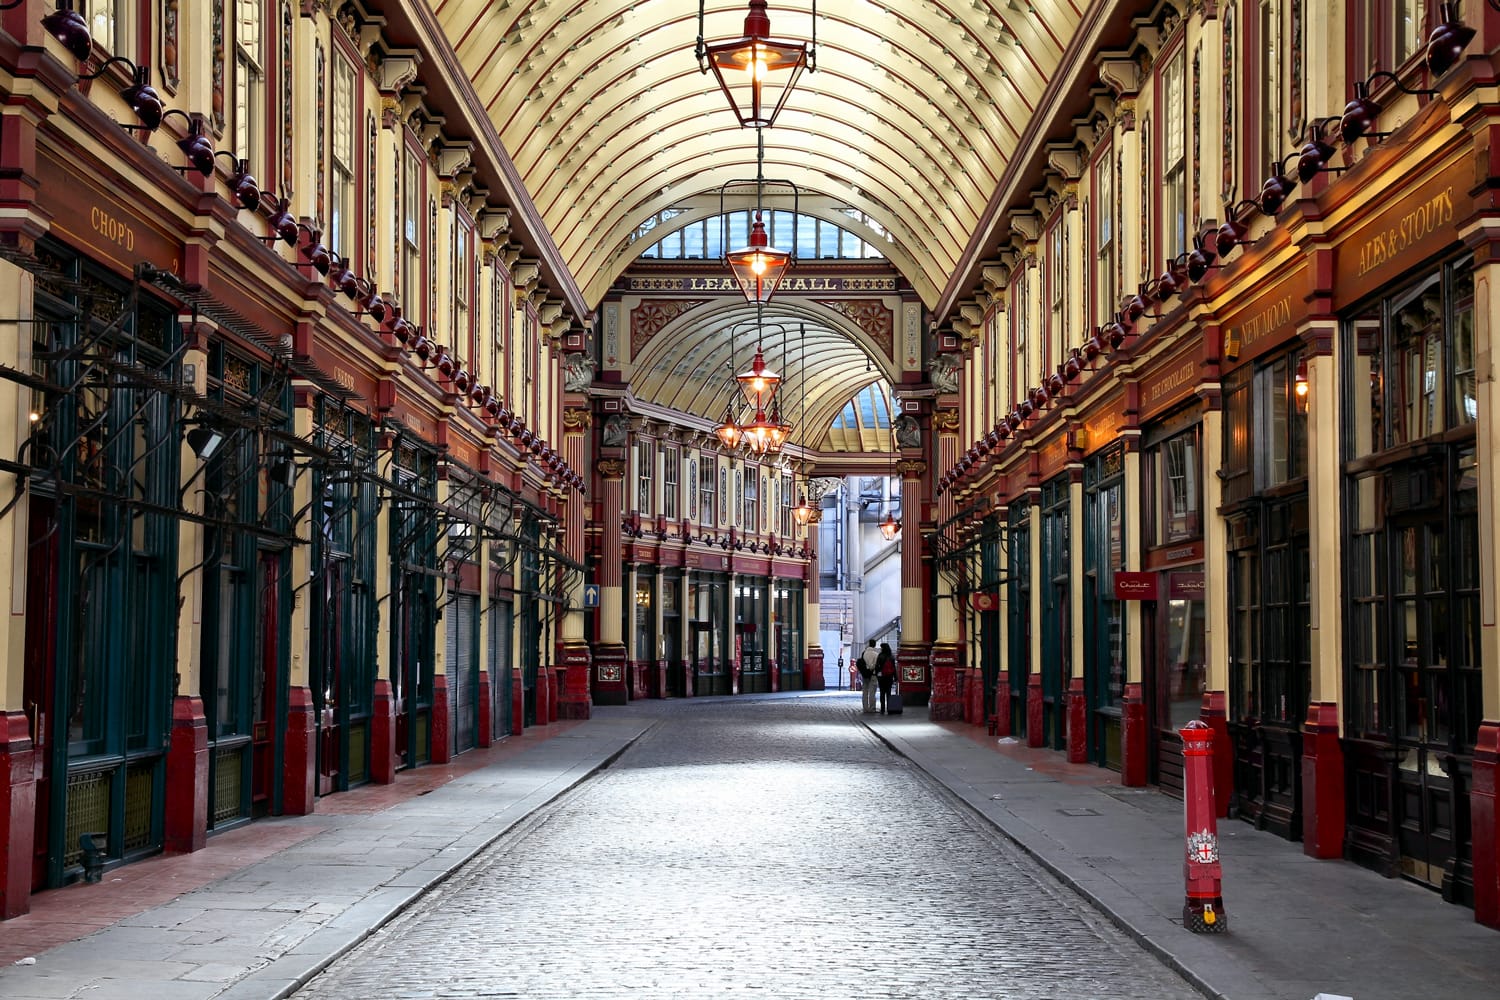 Leadenhall market in London. It is one of the oldest markets in London, dating back to the 14th century.